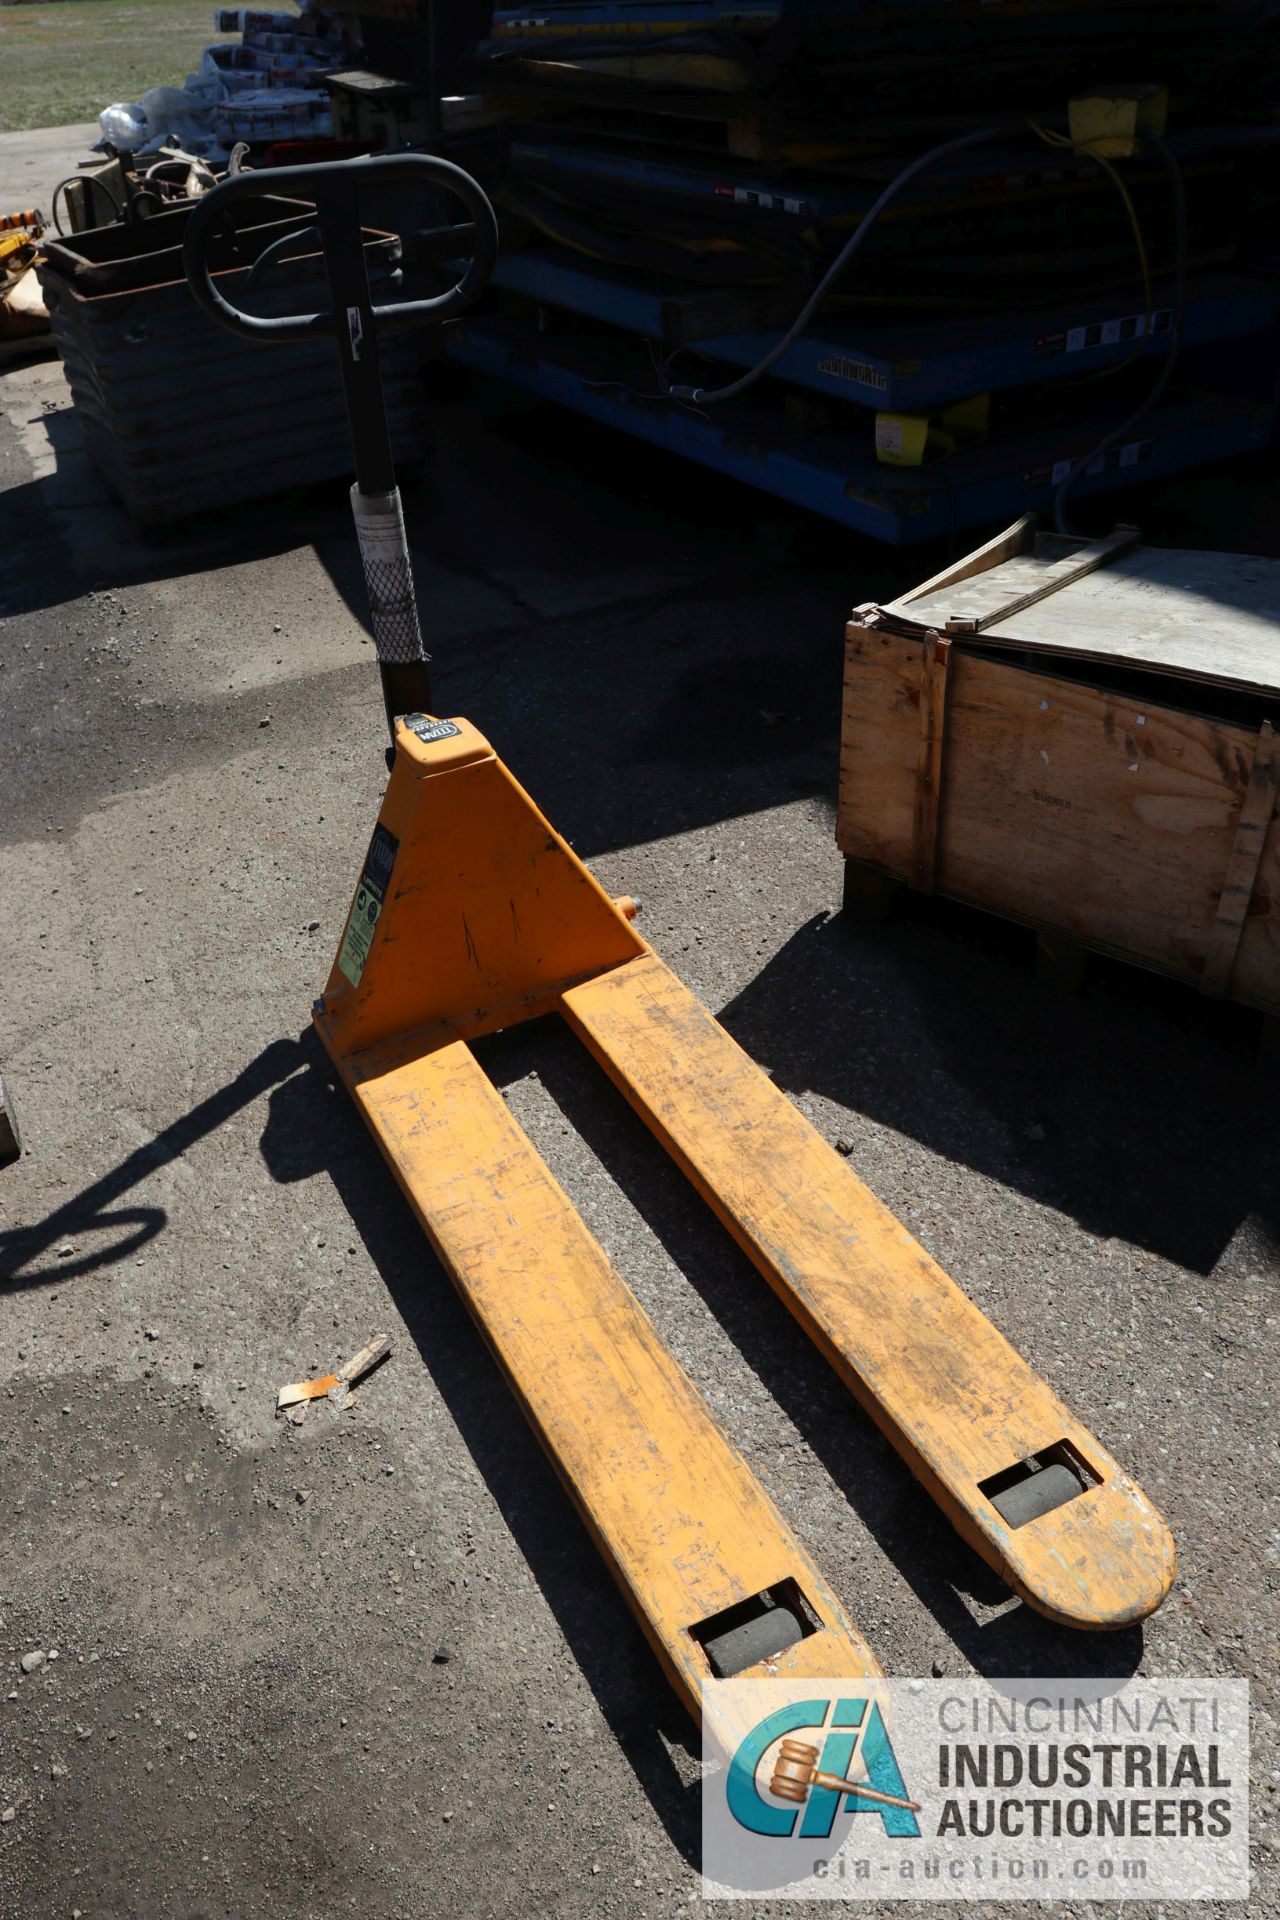 5,500 LB. TITAN MANUAL PALLET JACK - $10.00 Rigging Fee Due to Onsite Rigger - Located in Holland,